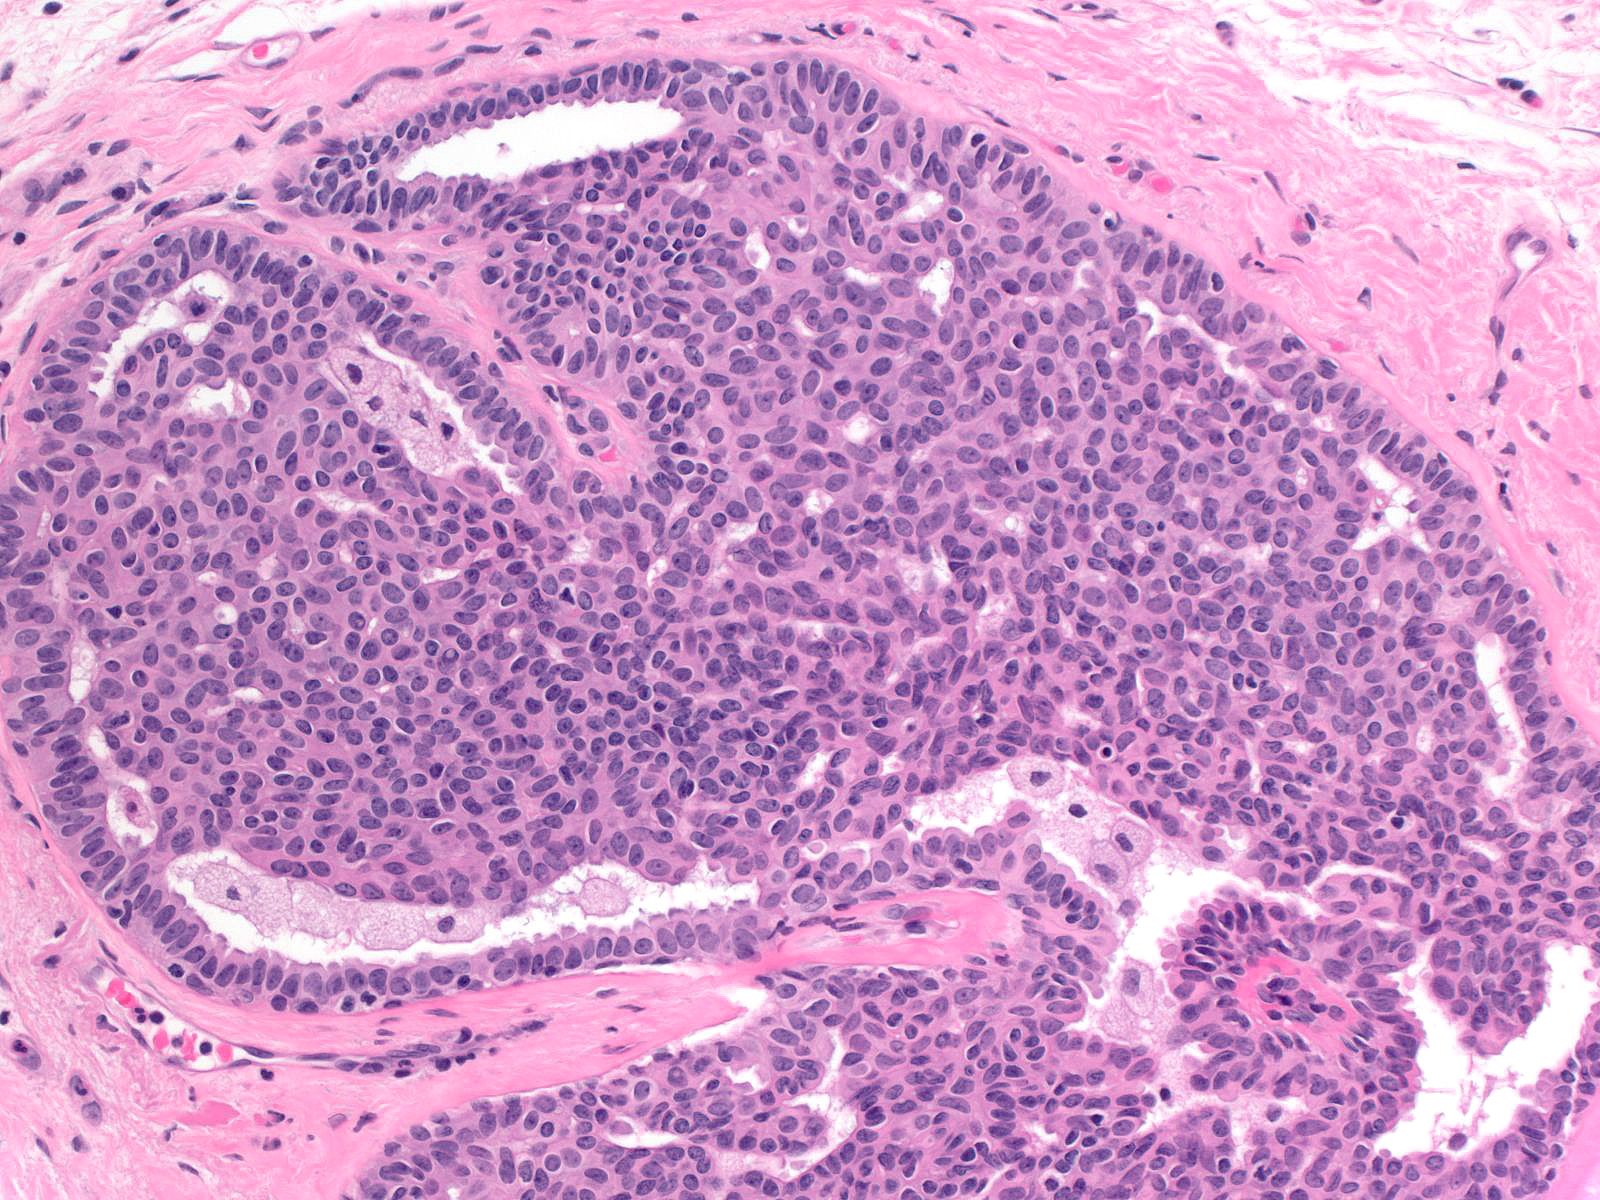 Intraductal papilloma with epithelial hyperplasia